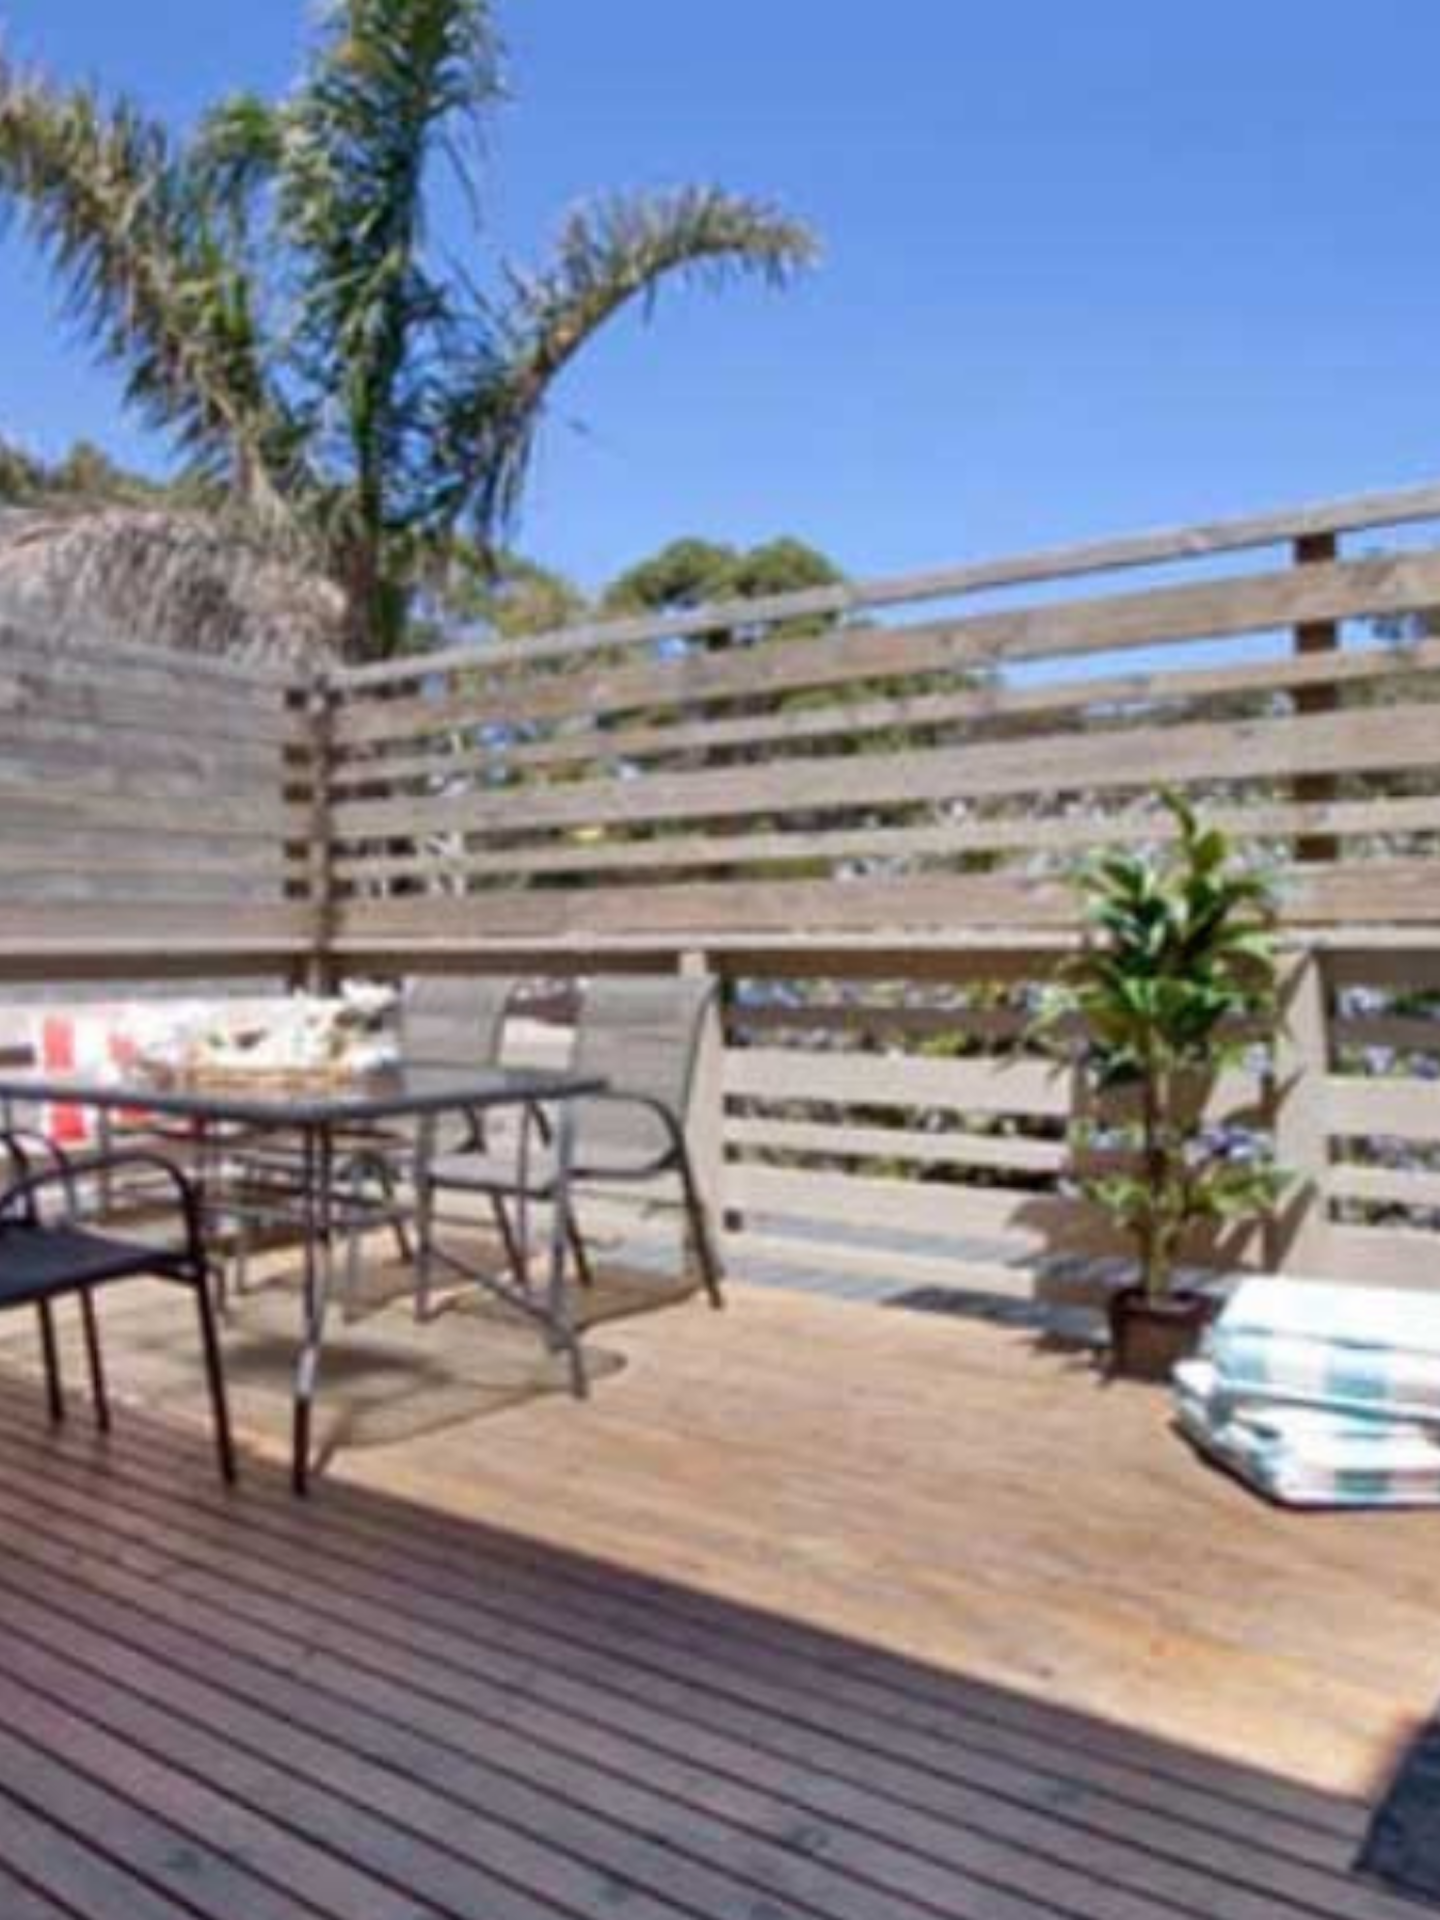 sunny deck with outdoor setting and barbeque